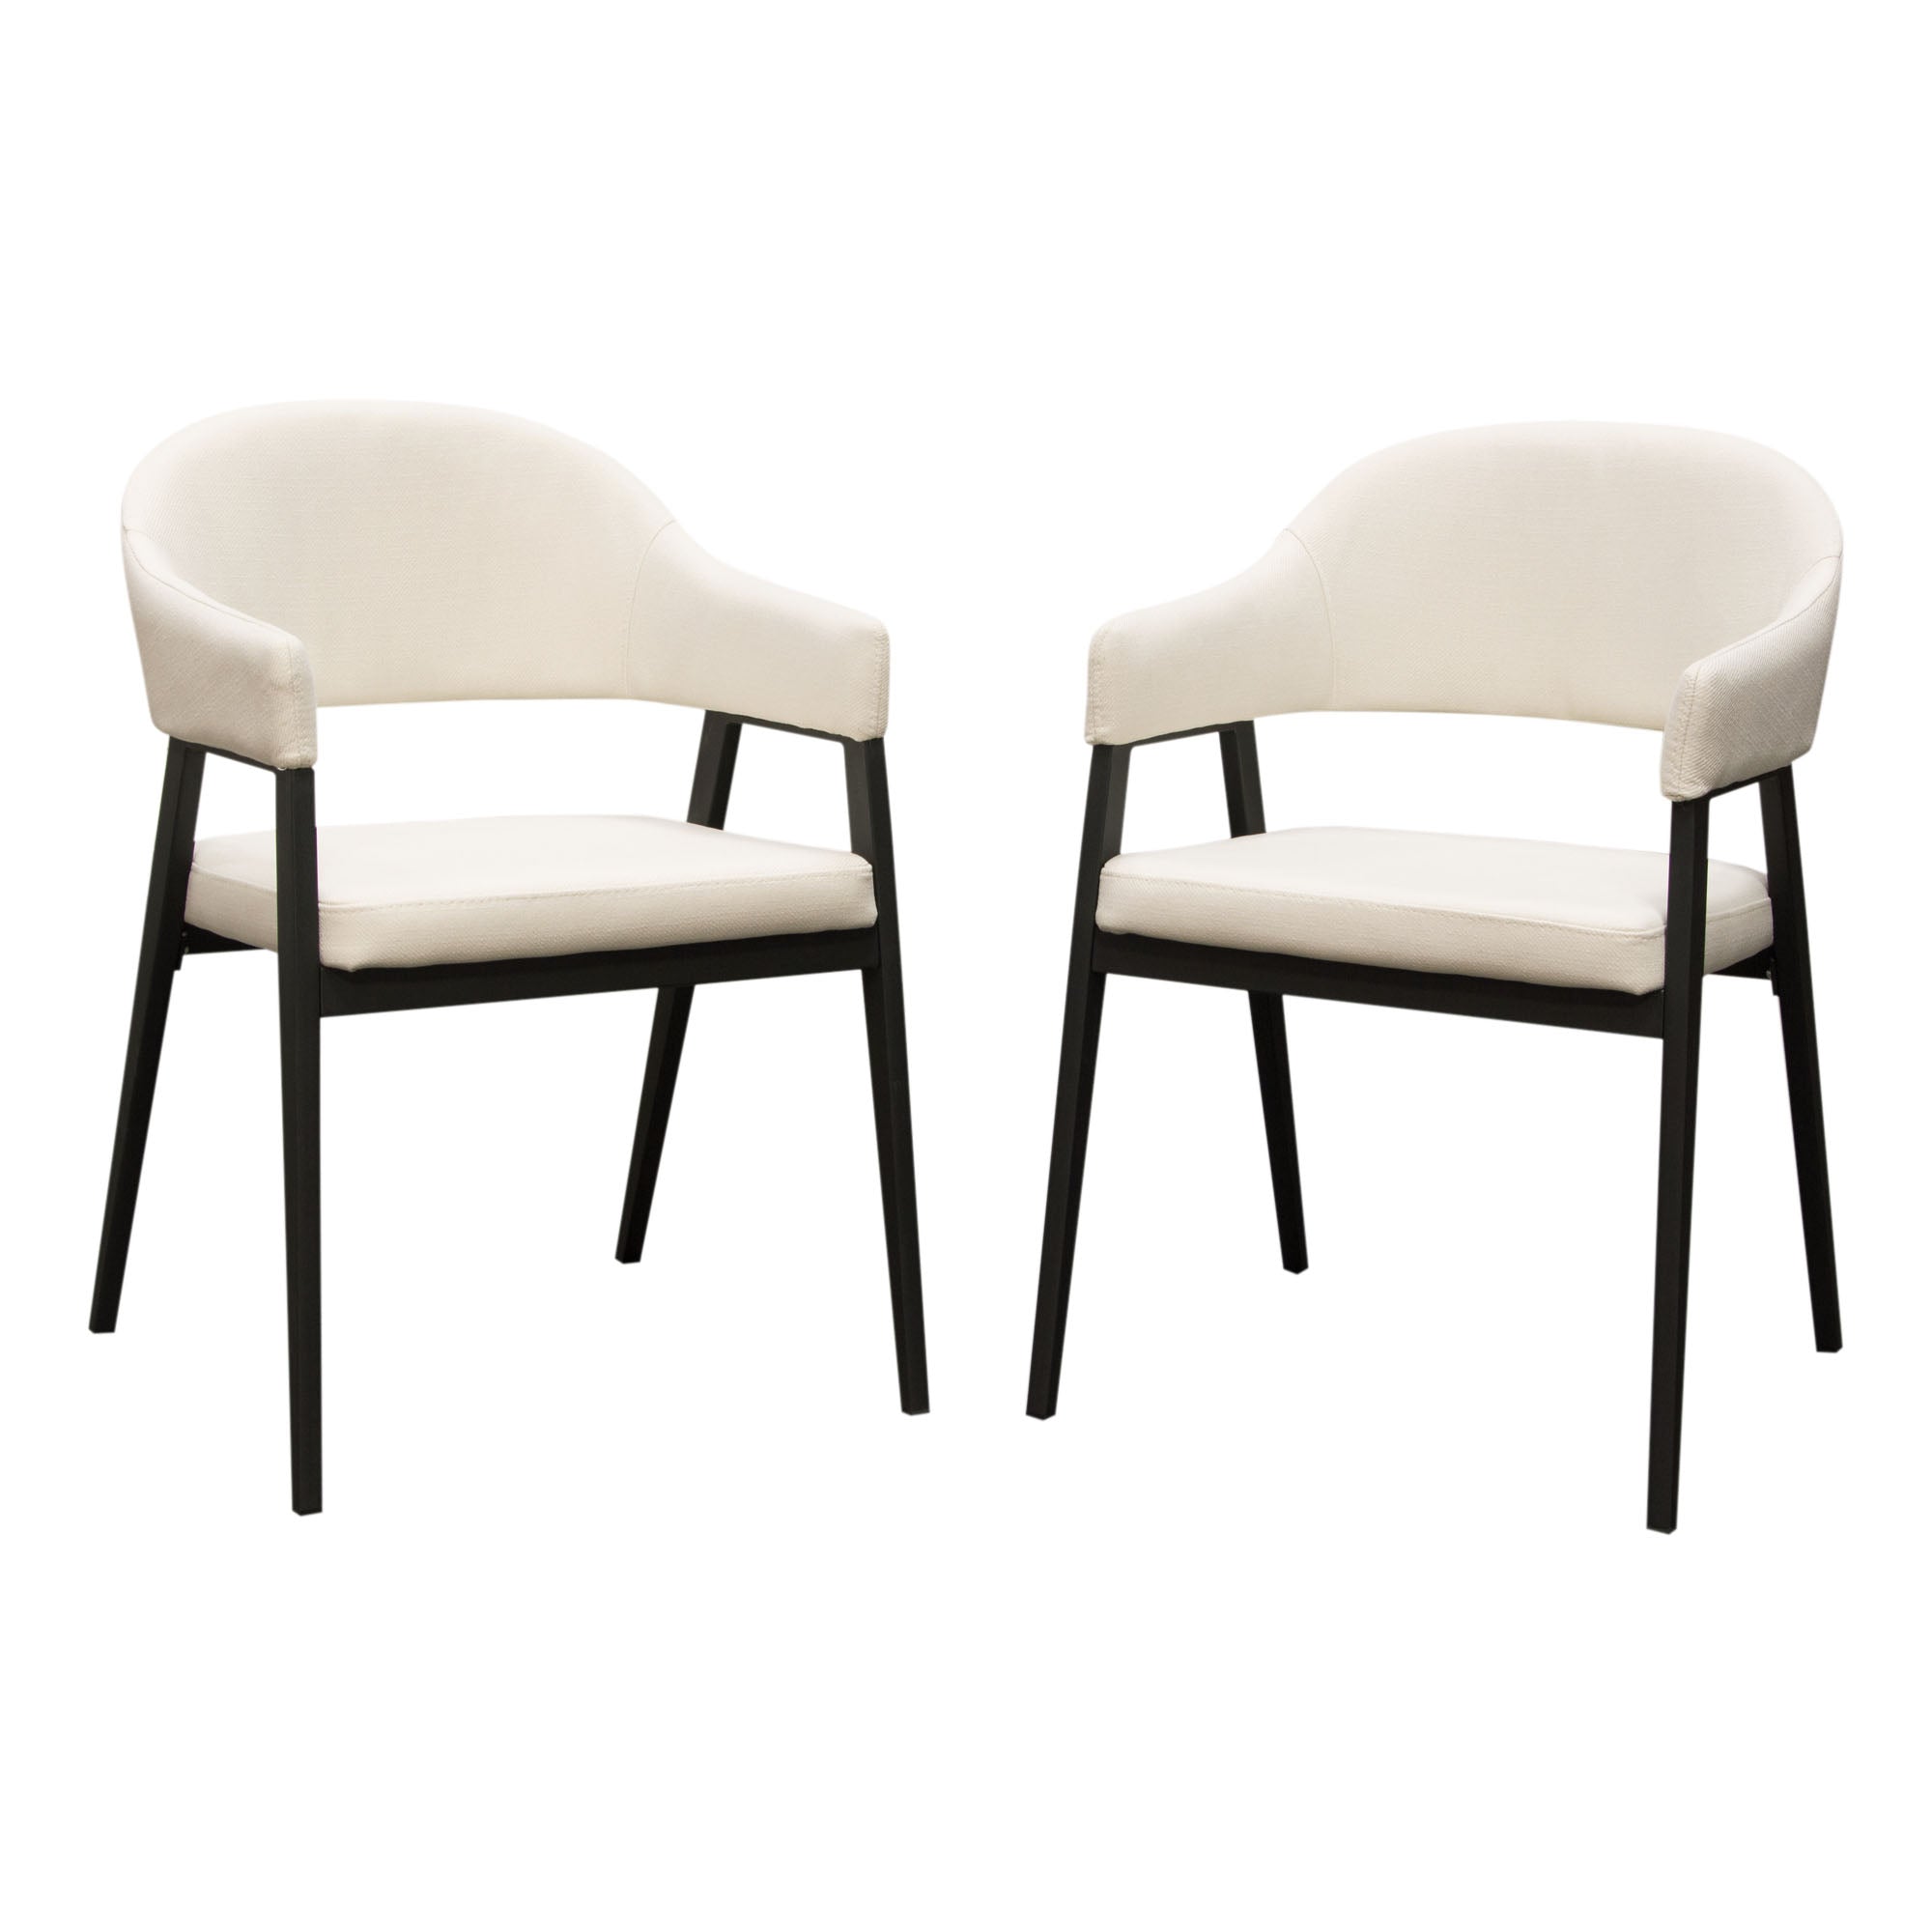 Adele Dining Chair - Set Of 2